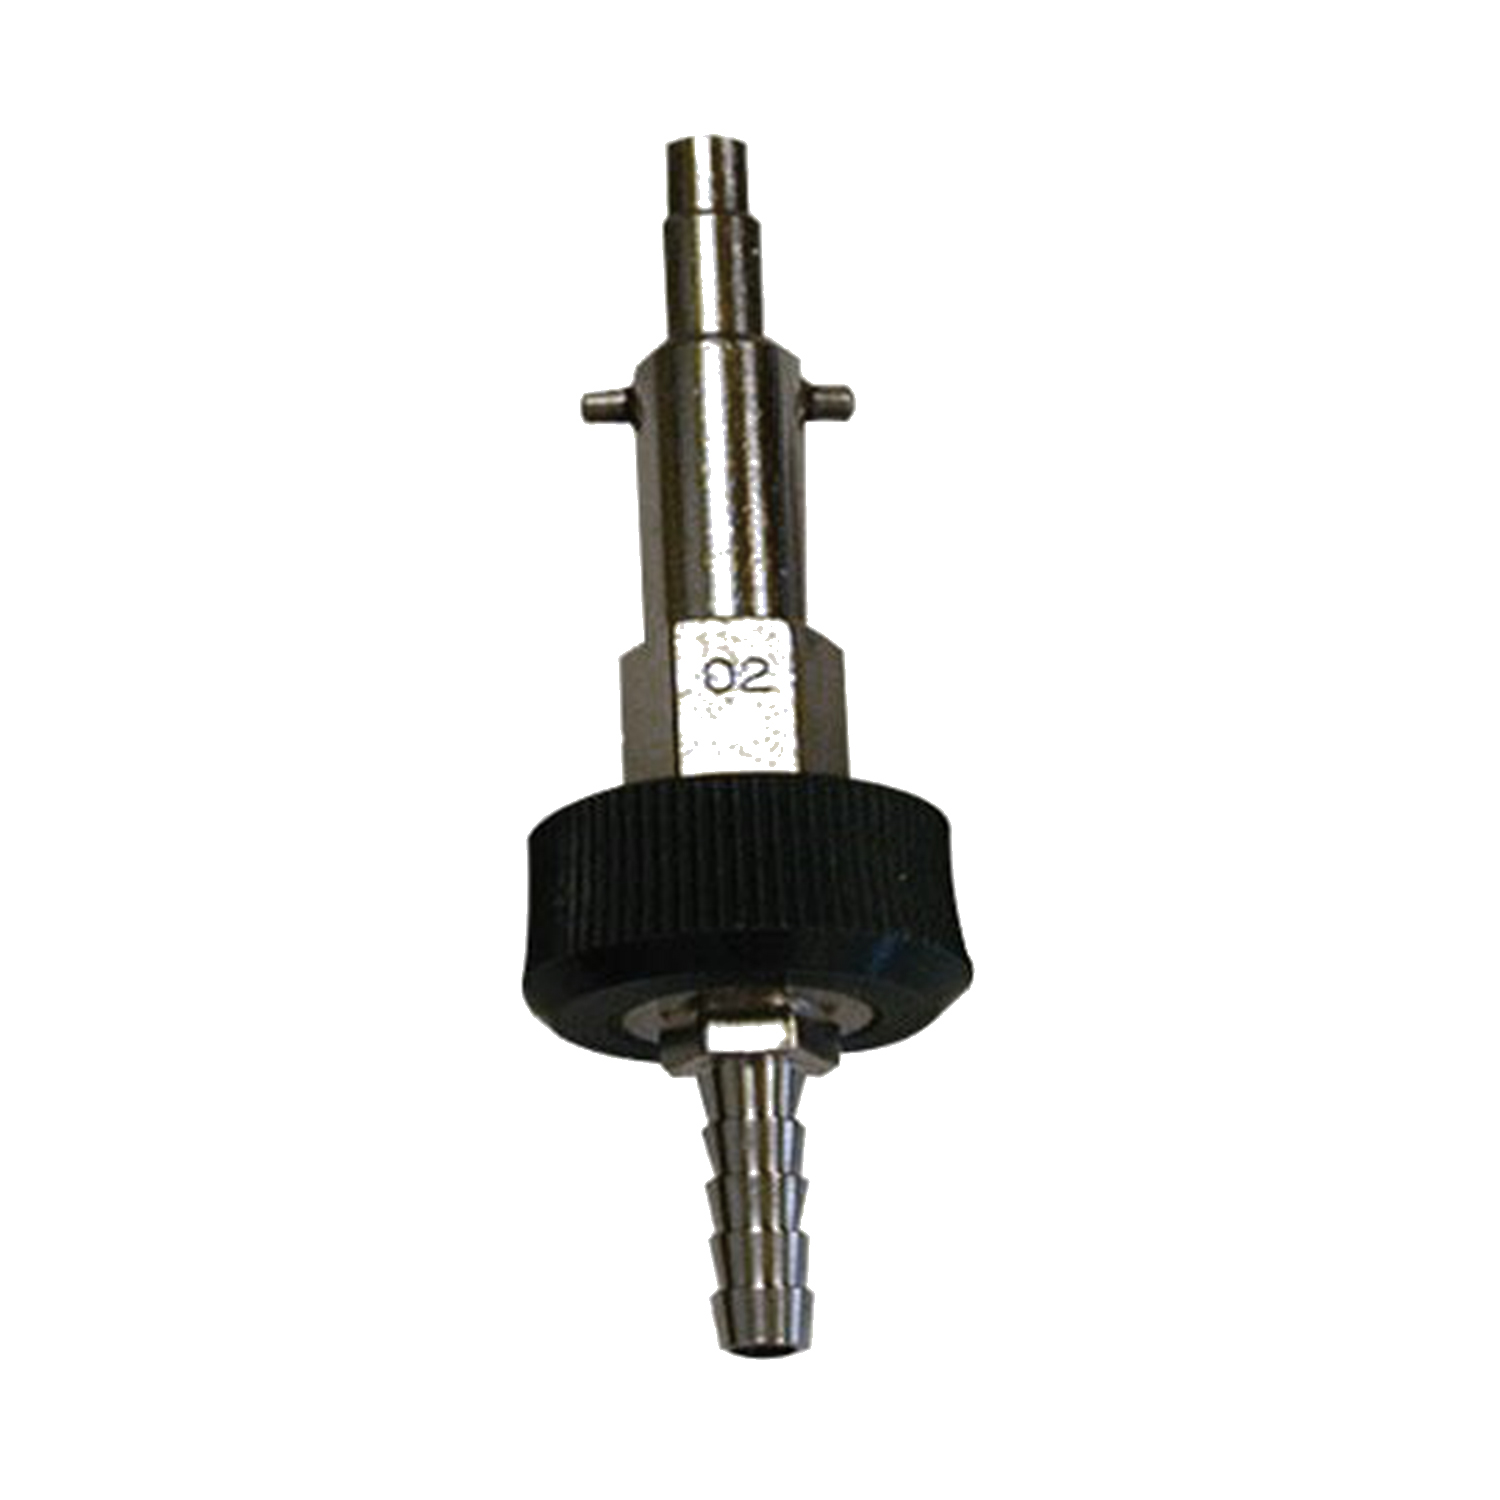 Oxequip-Style 1/4" Male Fitting for Oxygen Hose